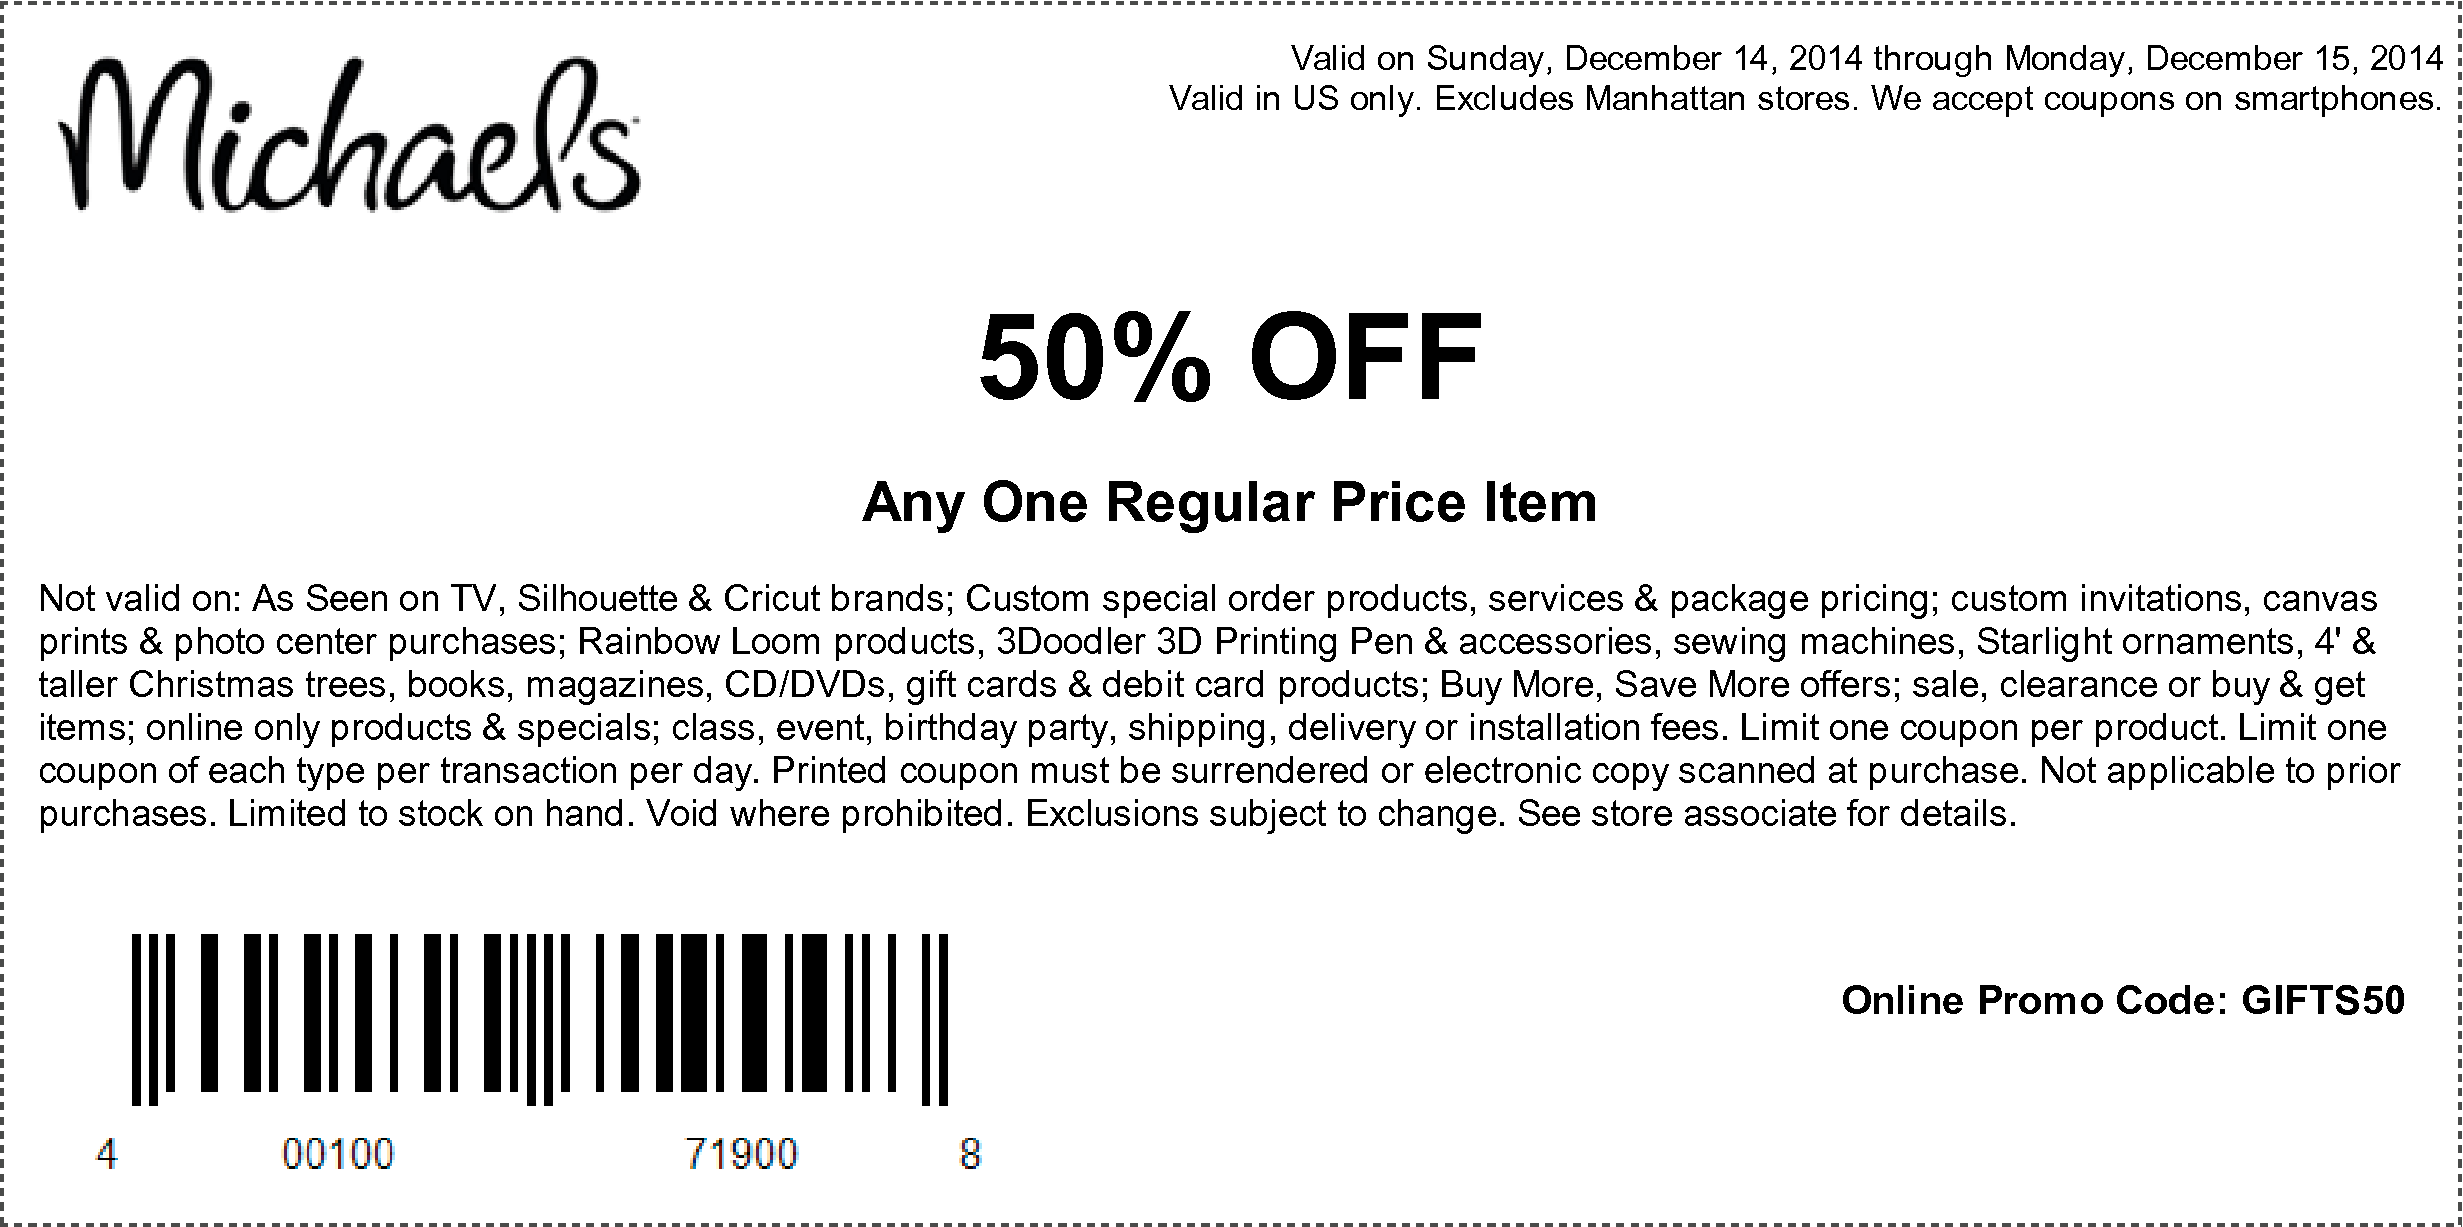 ... 50% off a single item at Michaels, or online via promo code GIFTS50